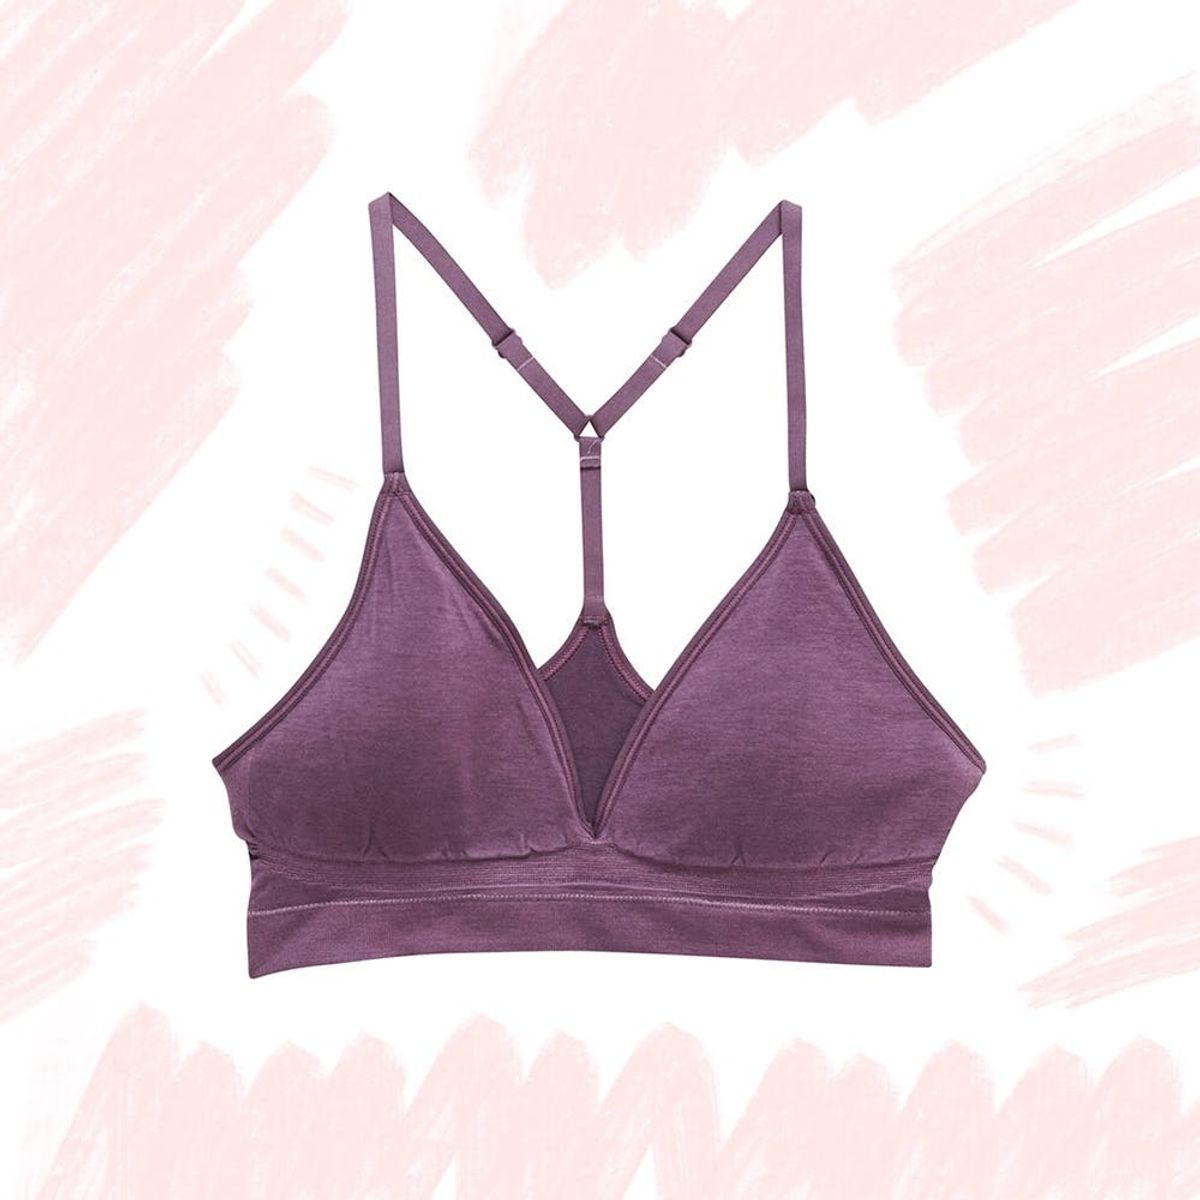 We Tried a Bra: The Best Stretchy Bra for Different-Sized Boobs